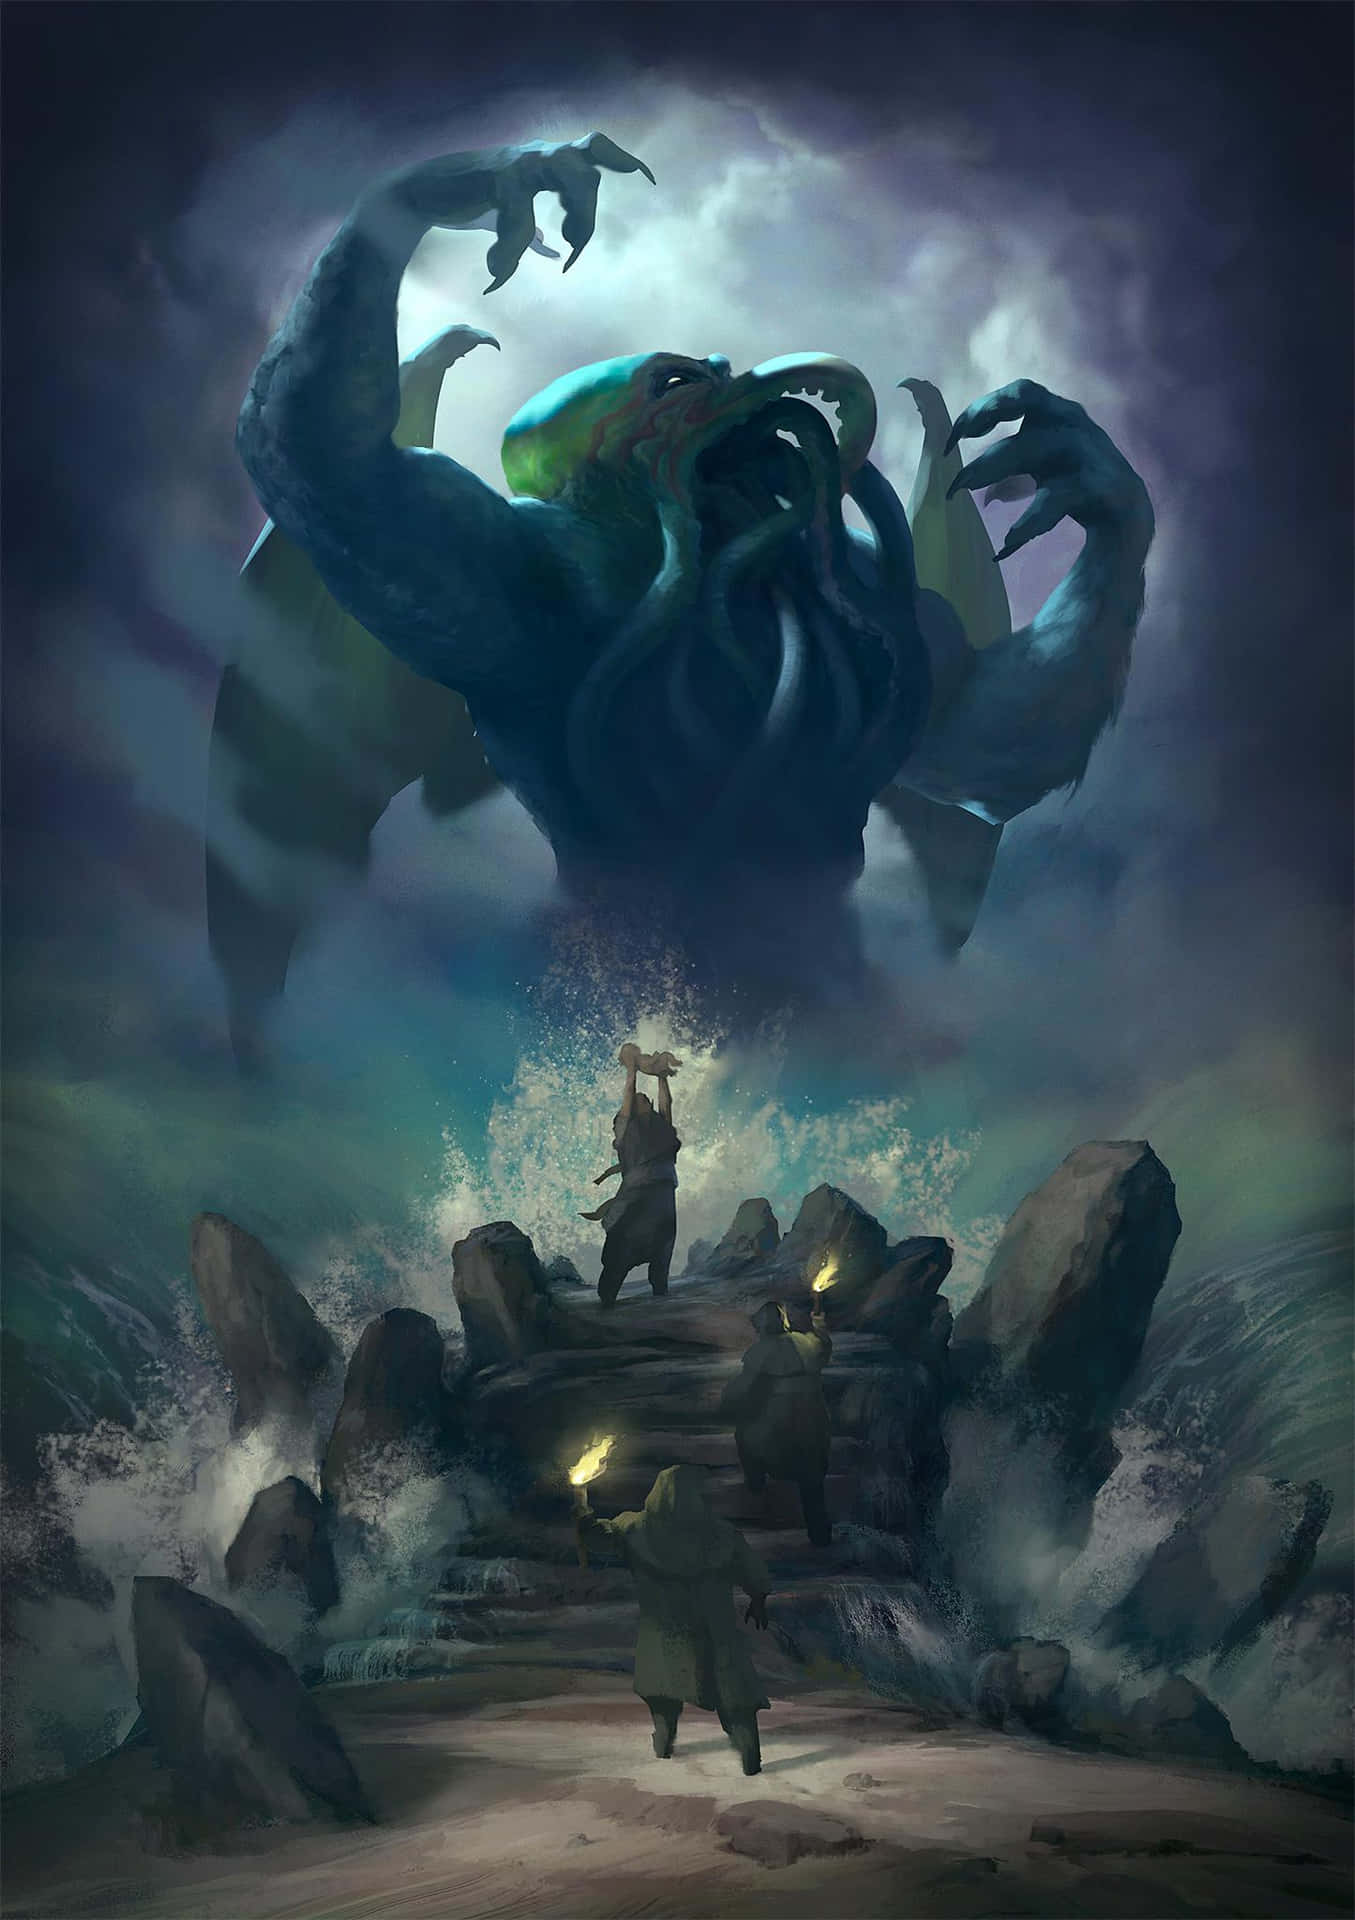 "Rise of the Dread Cthulhu"